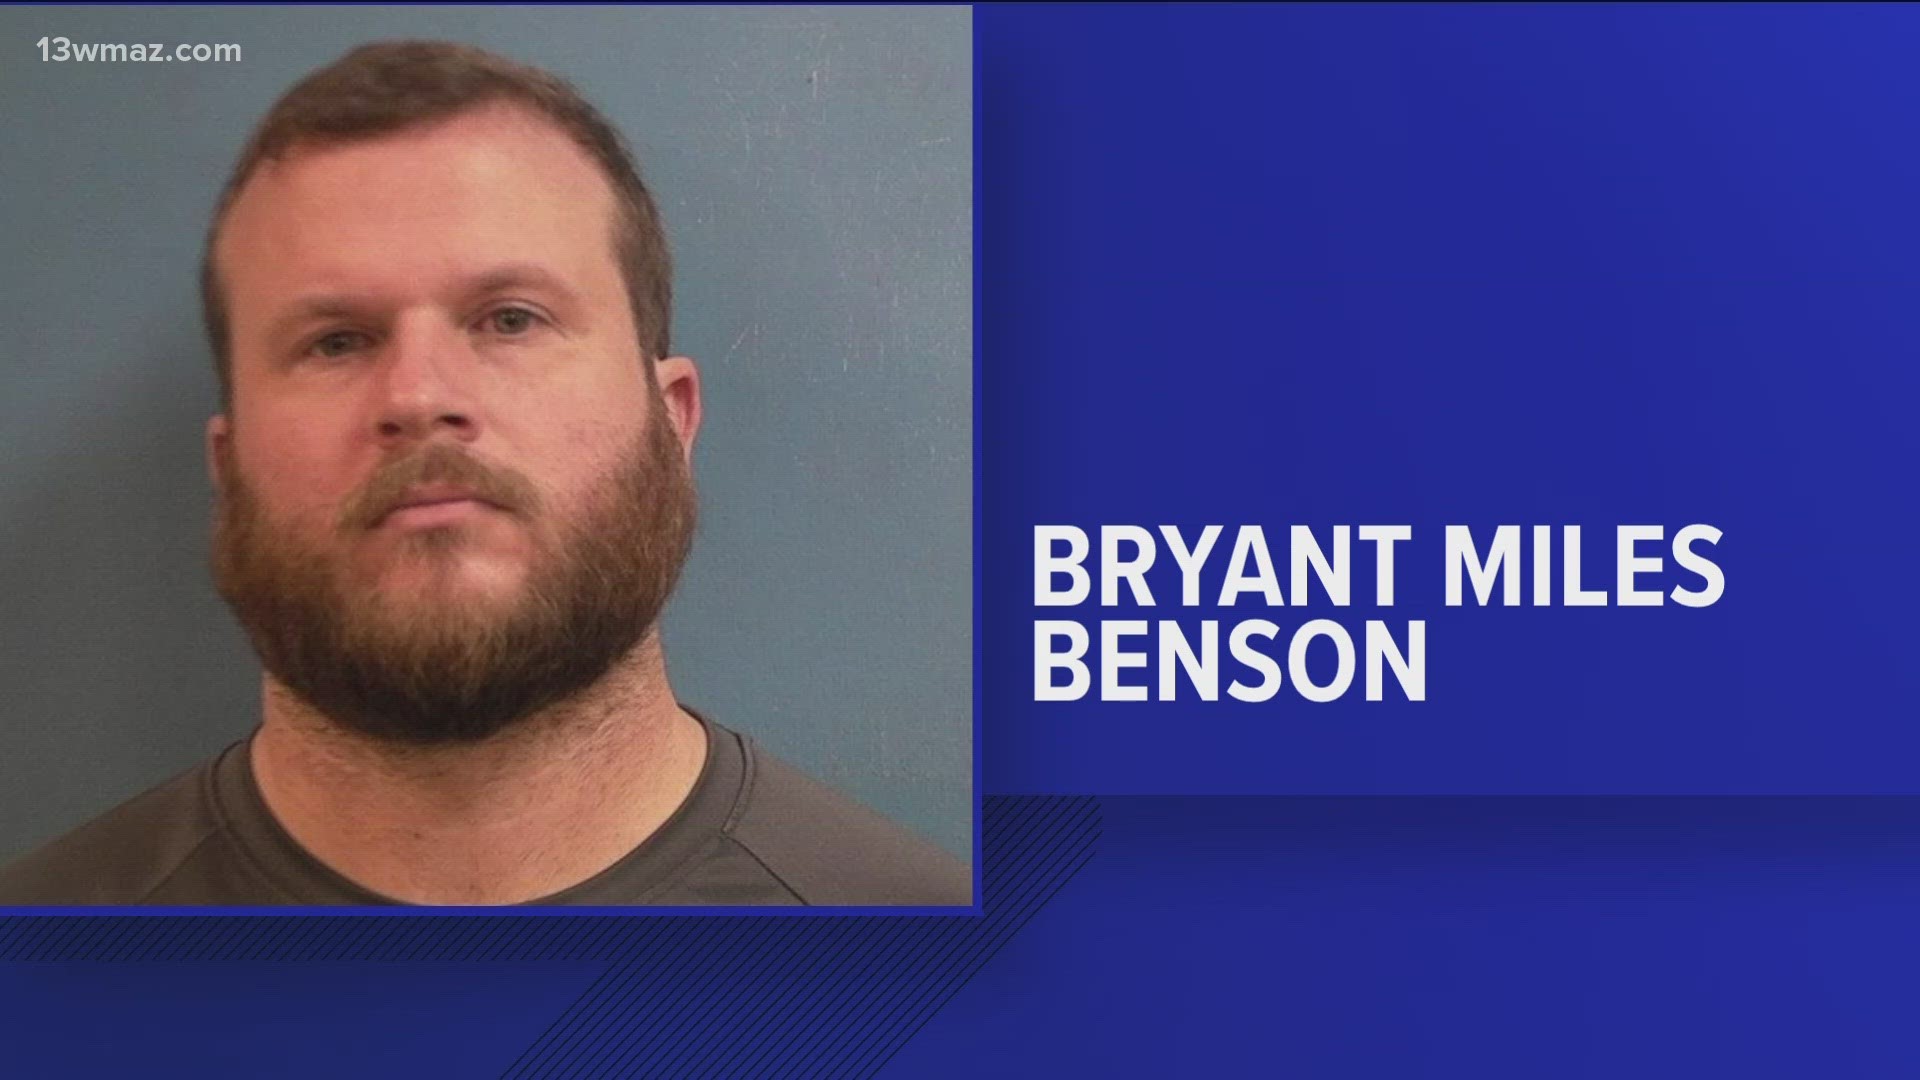 District Attorney Jonathan Adams says Bryant Miles Benson pleaded guilty Tuesday in Monroe County Superior Court to 10 felony counts.